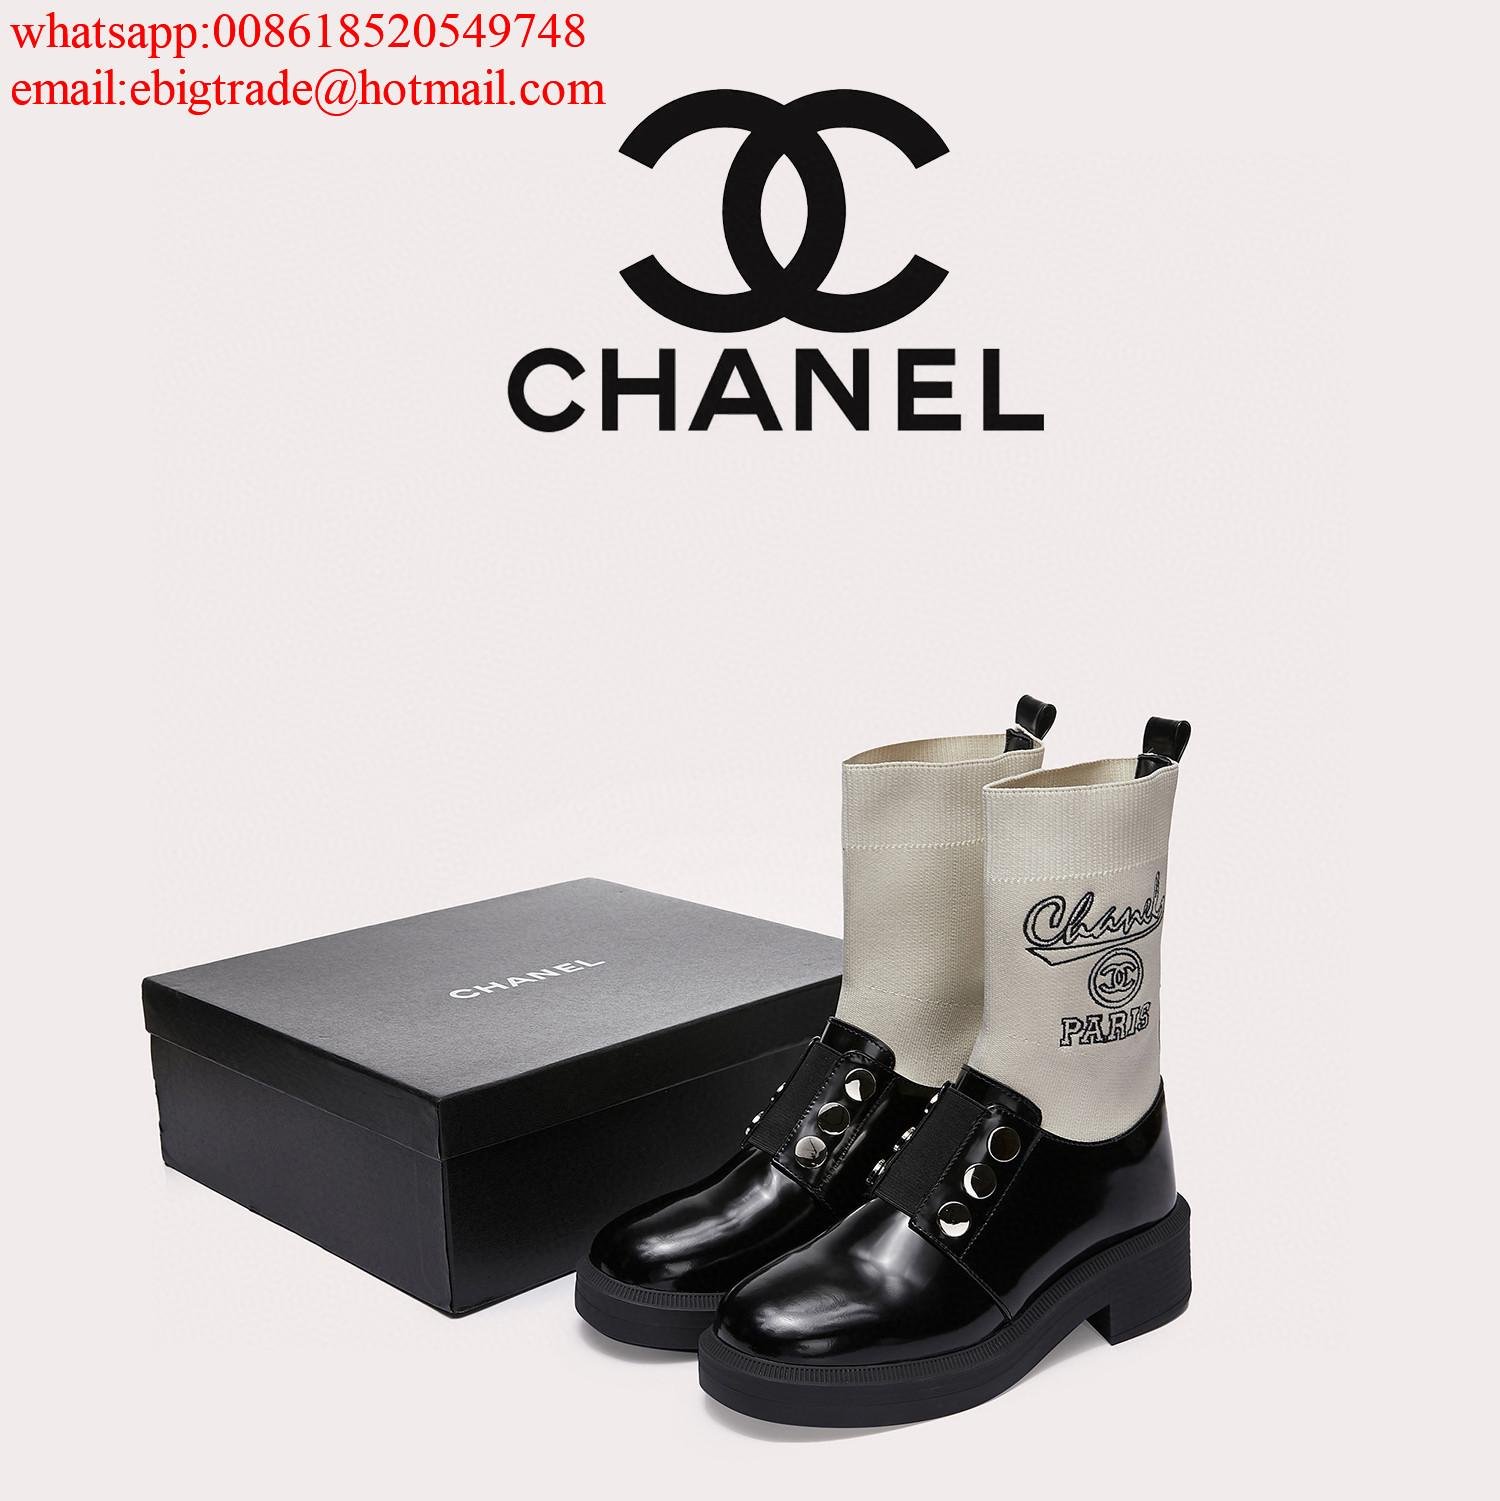 Chan-e-l Calfskin Leather shoes CC brand boots Coco brand leather boots on sale 